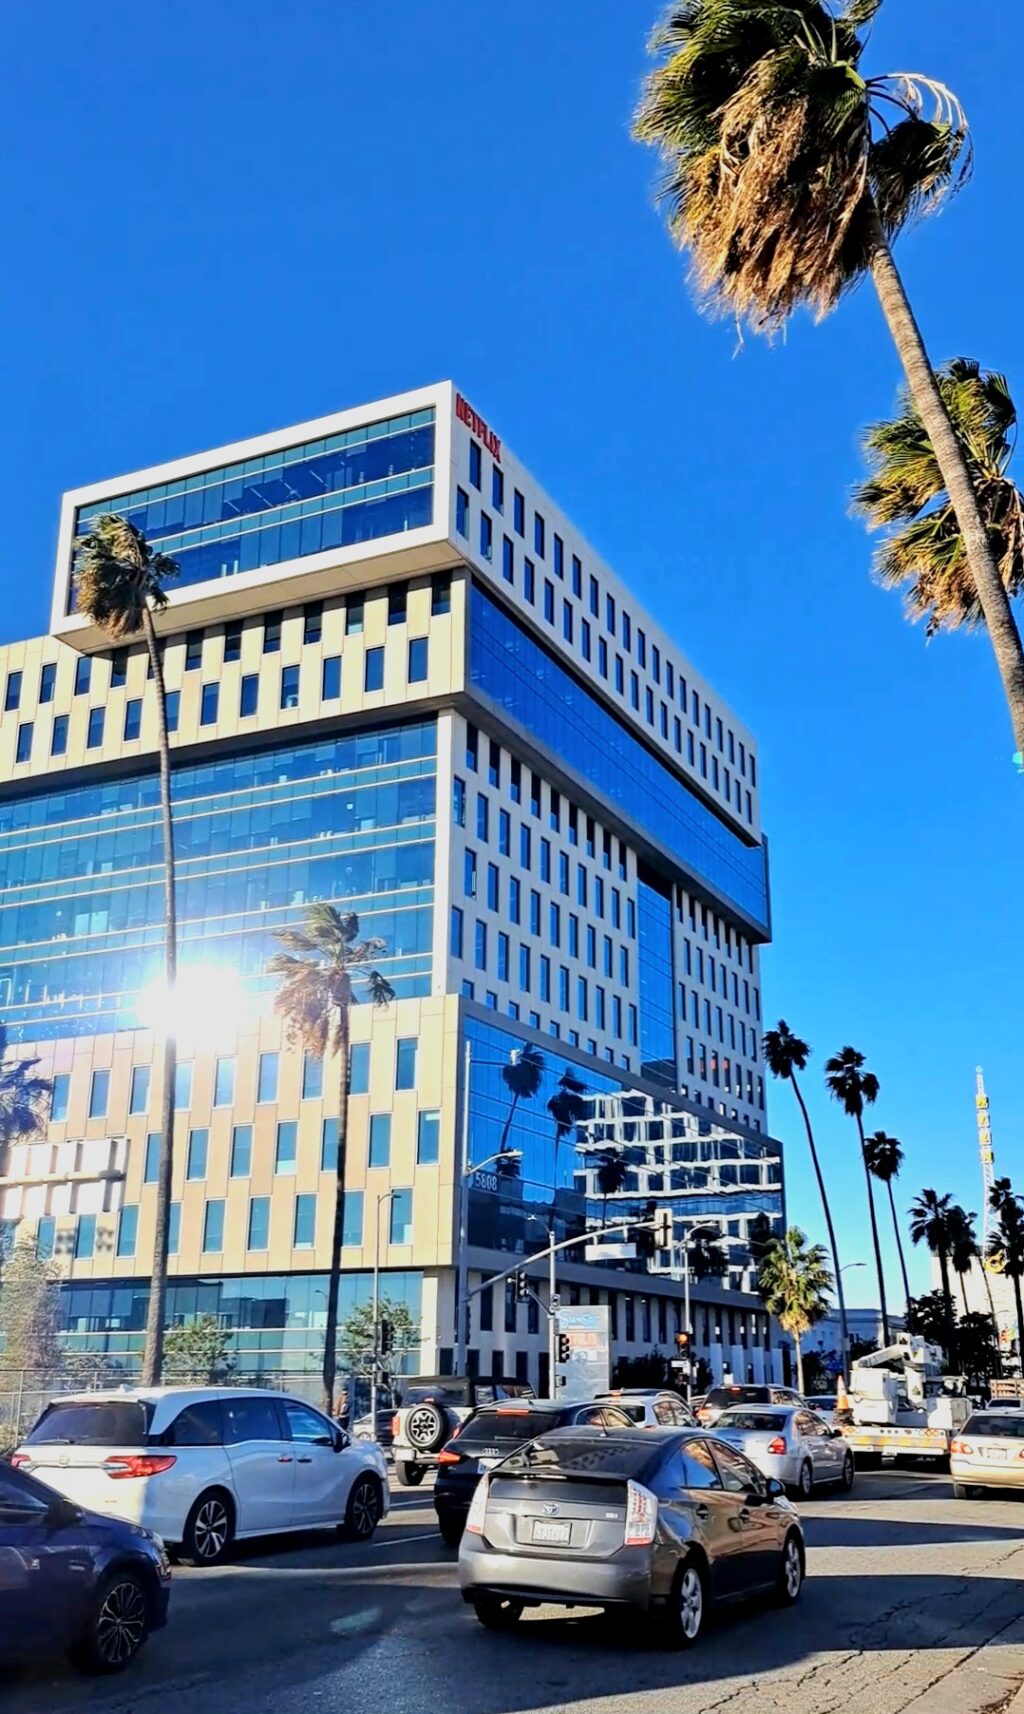 From Hollywood with Love. Netflix headquarters in Sunset Boulevard, LA.